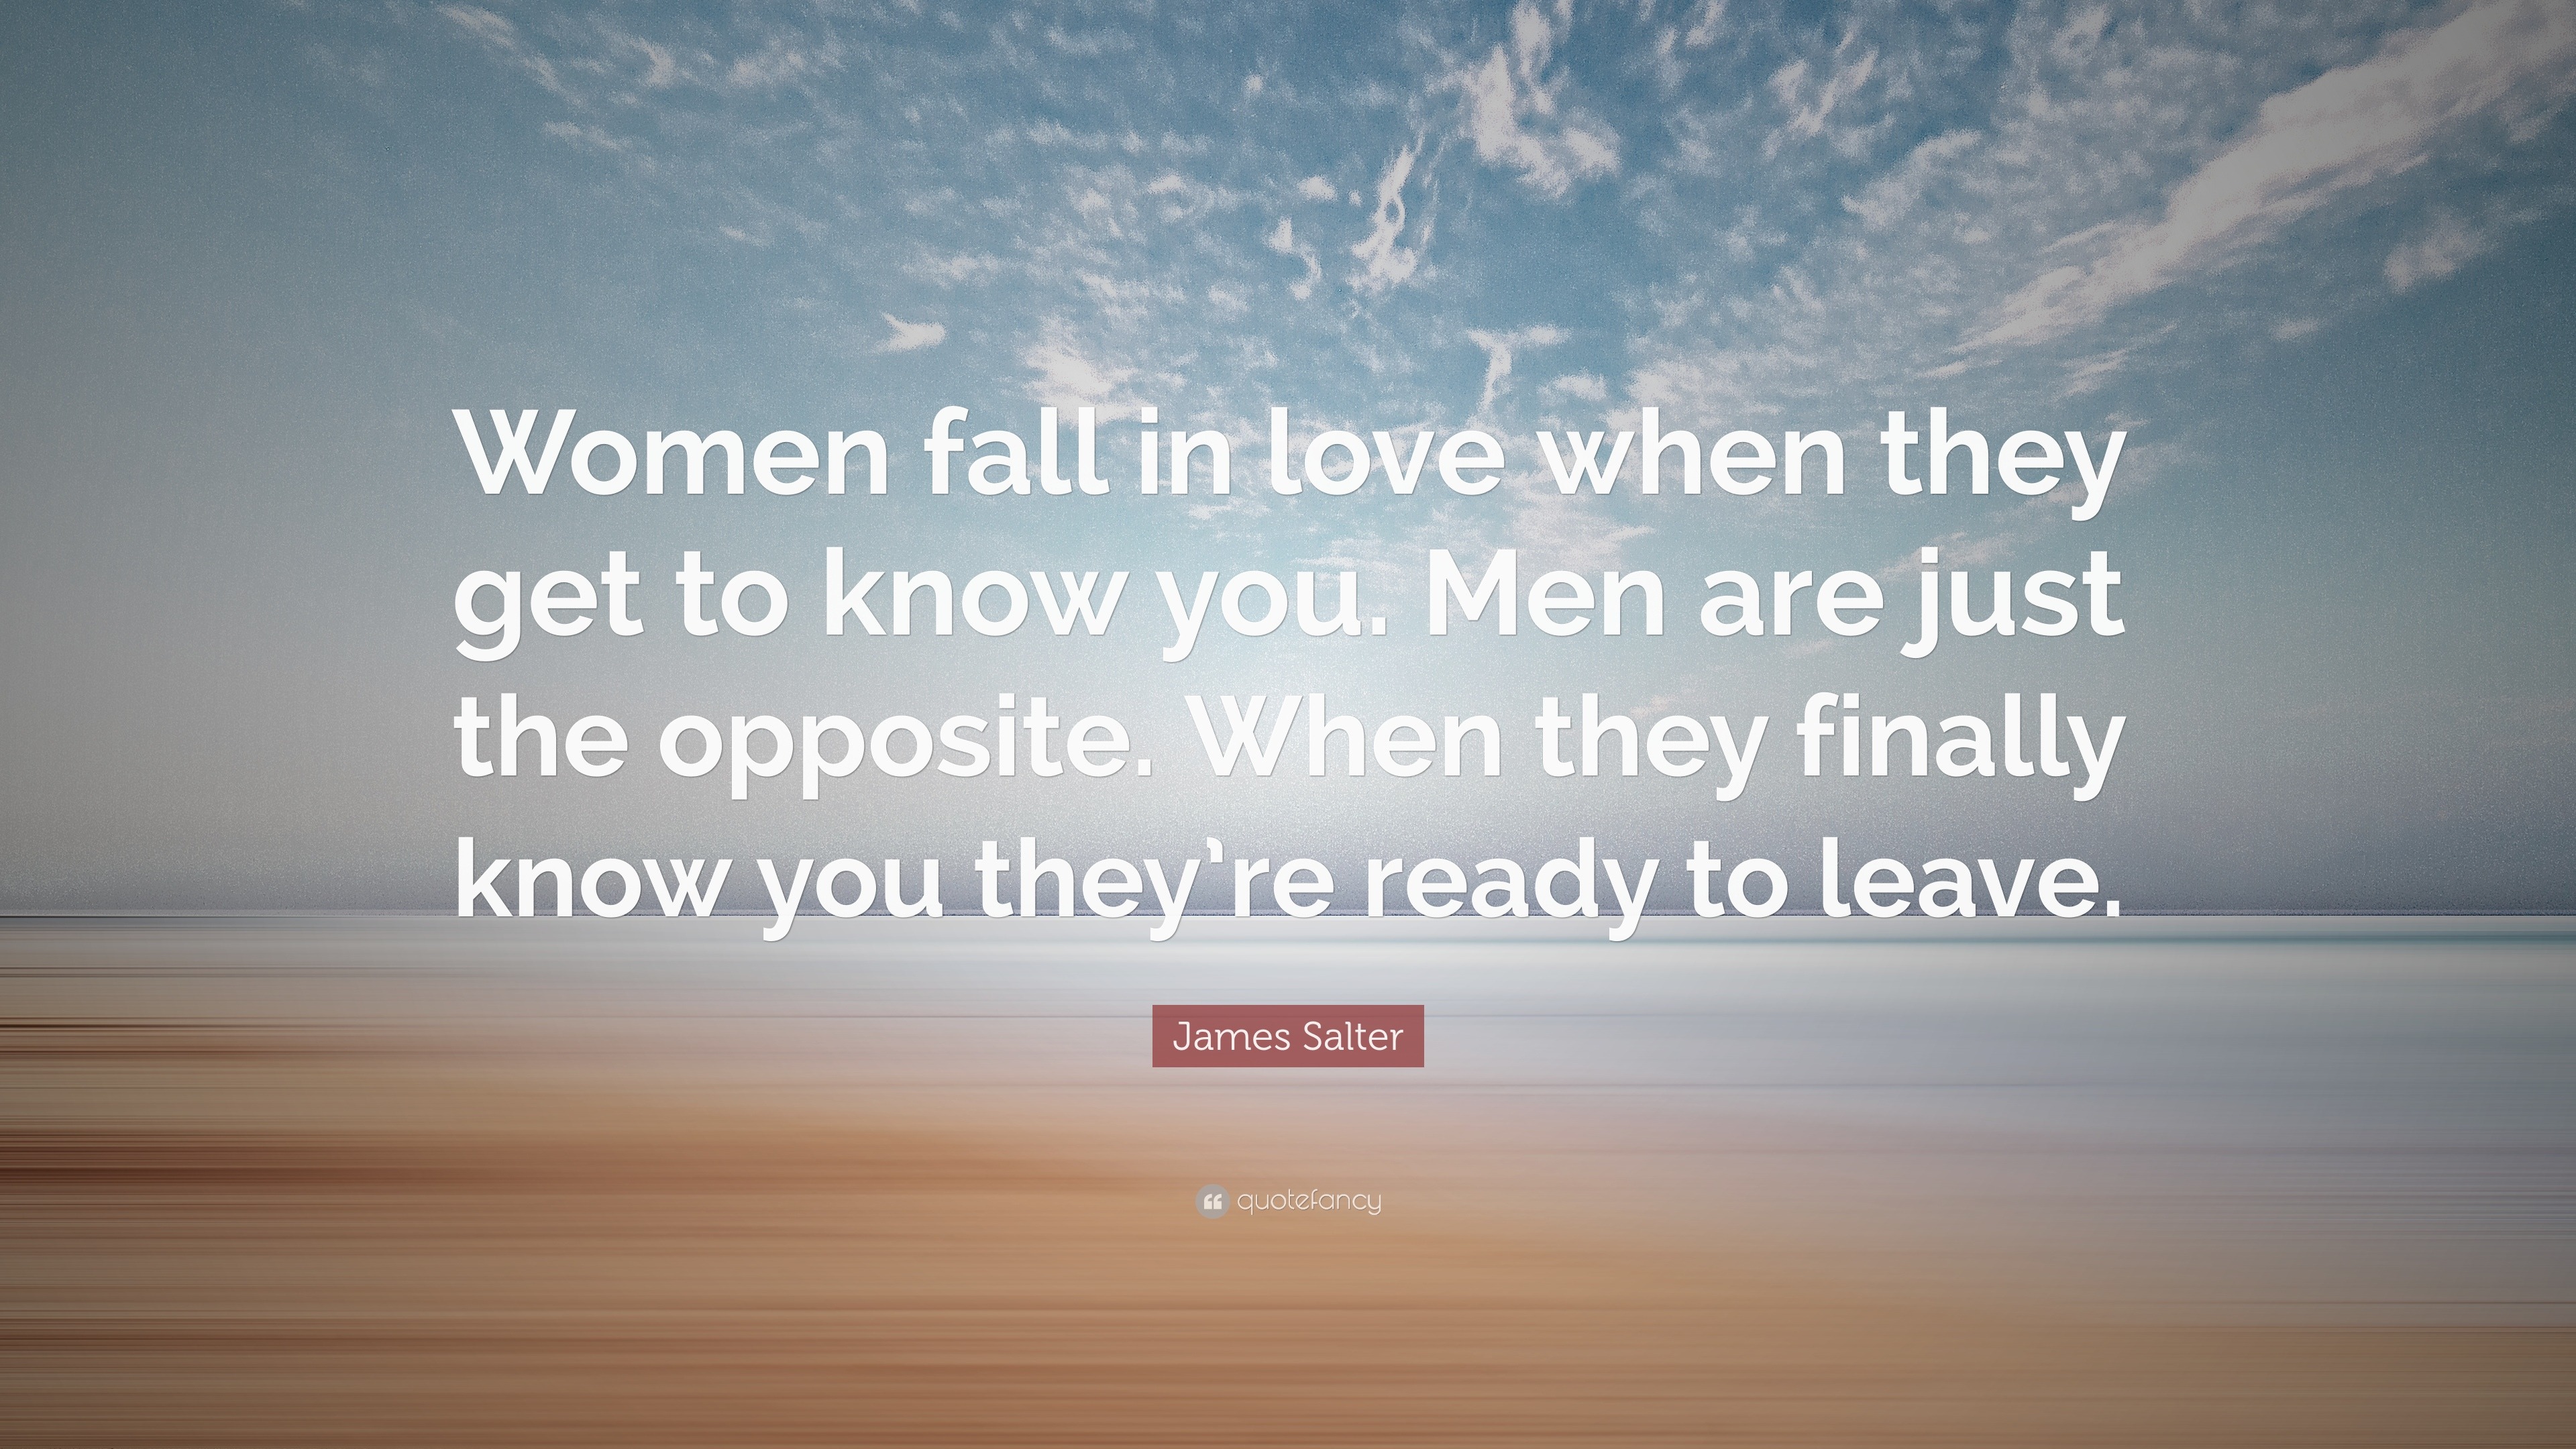 James Salter Quote “Women fall in love when they to know you